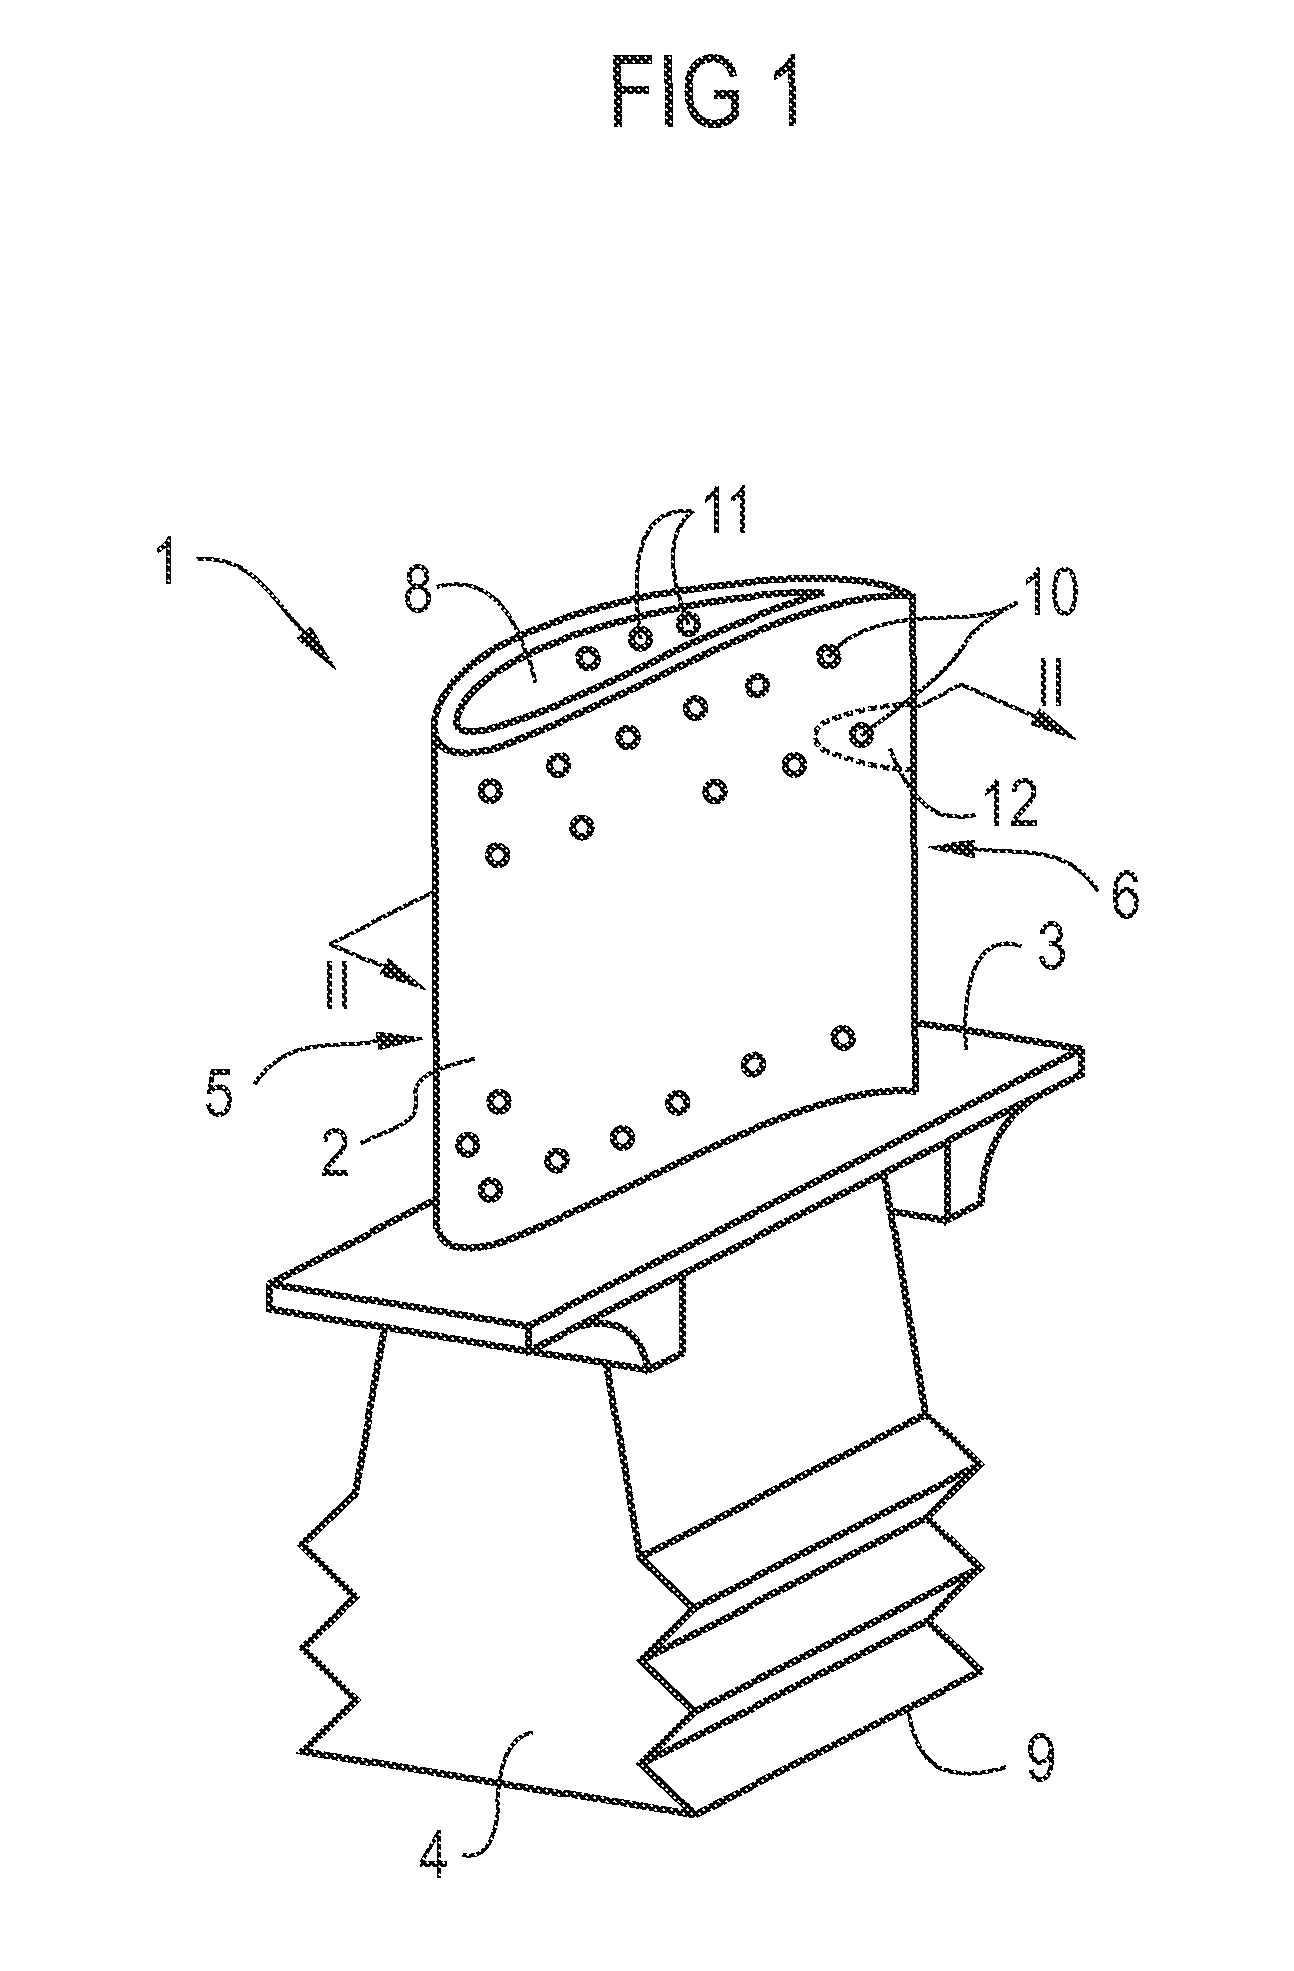 Automated repair method and system